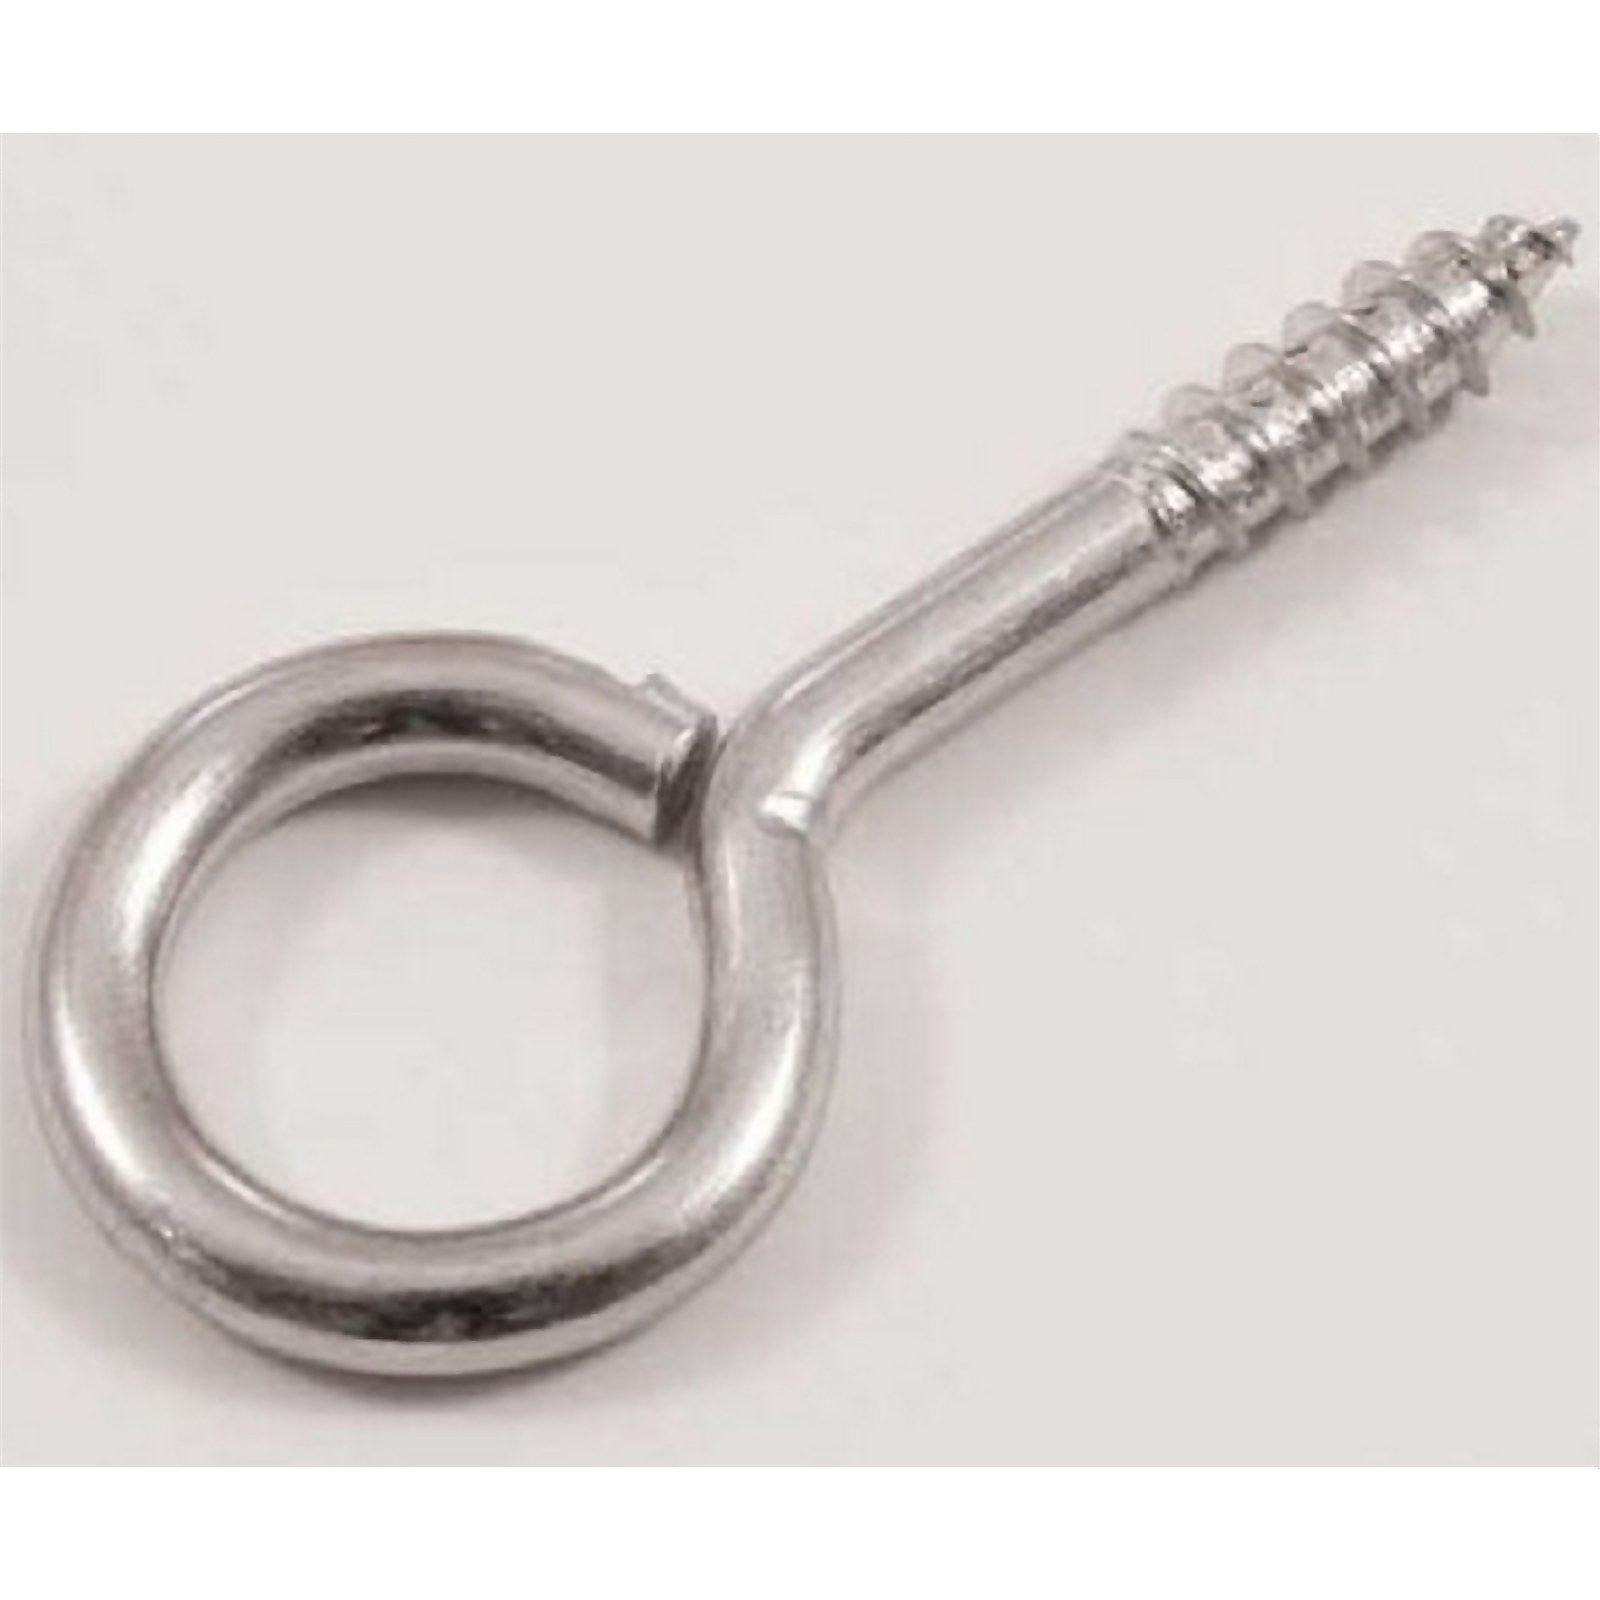 Photo of Screw Eyes - Zinc Plated - 55mm - 2 Pack